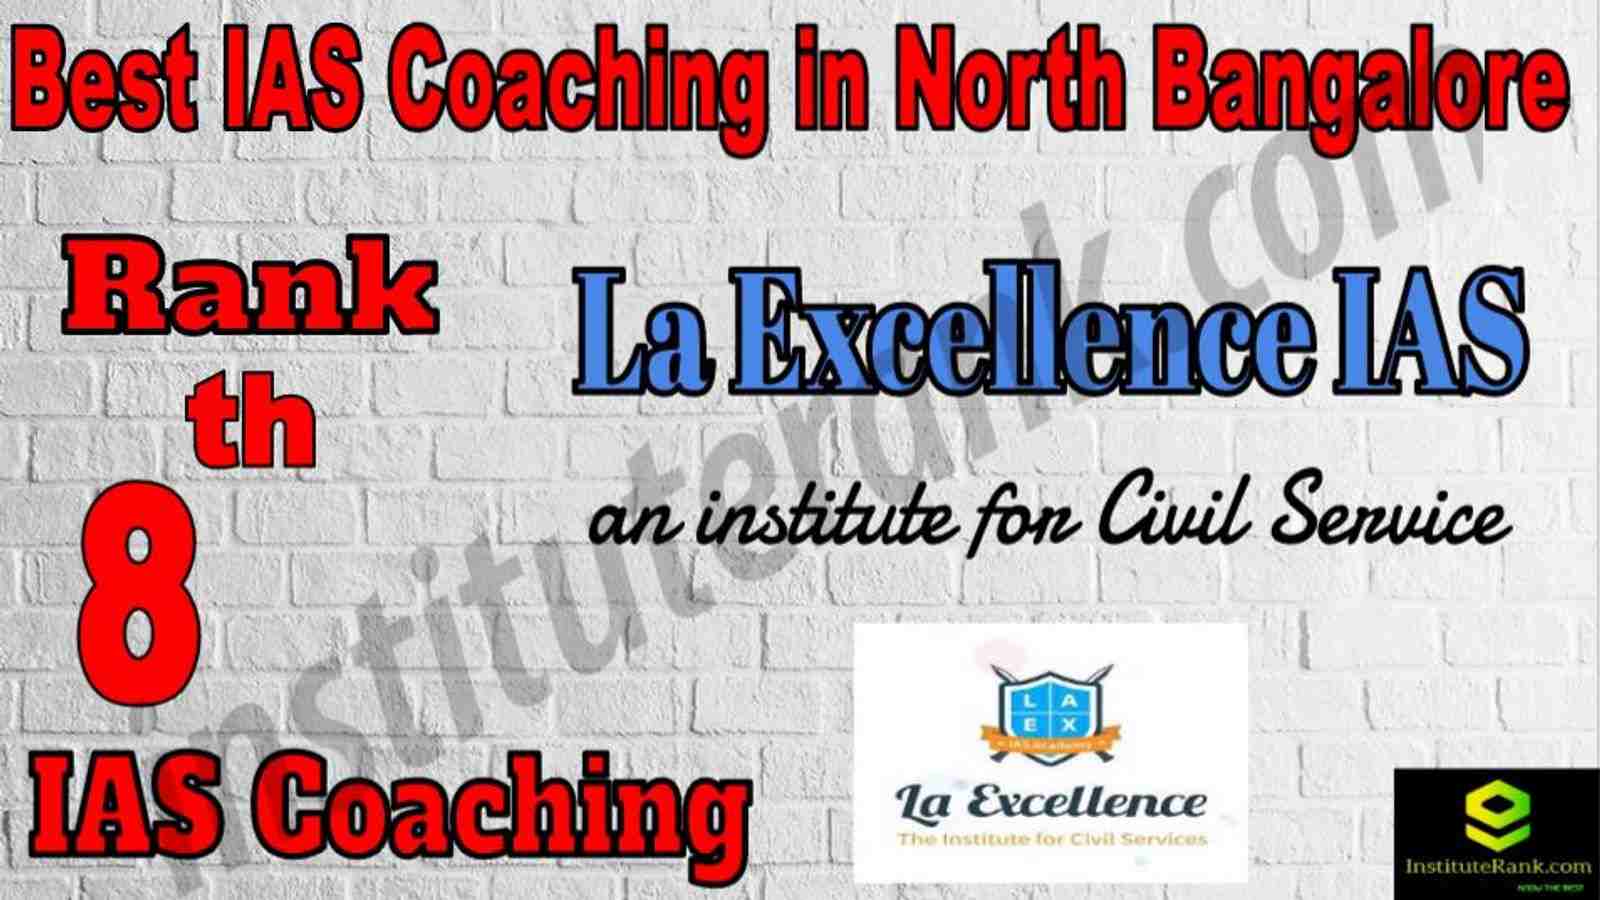 8th Best IAS Coaching in North Bangalore